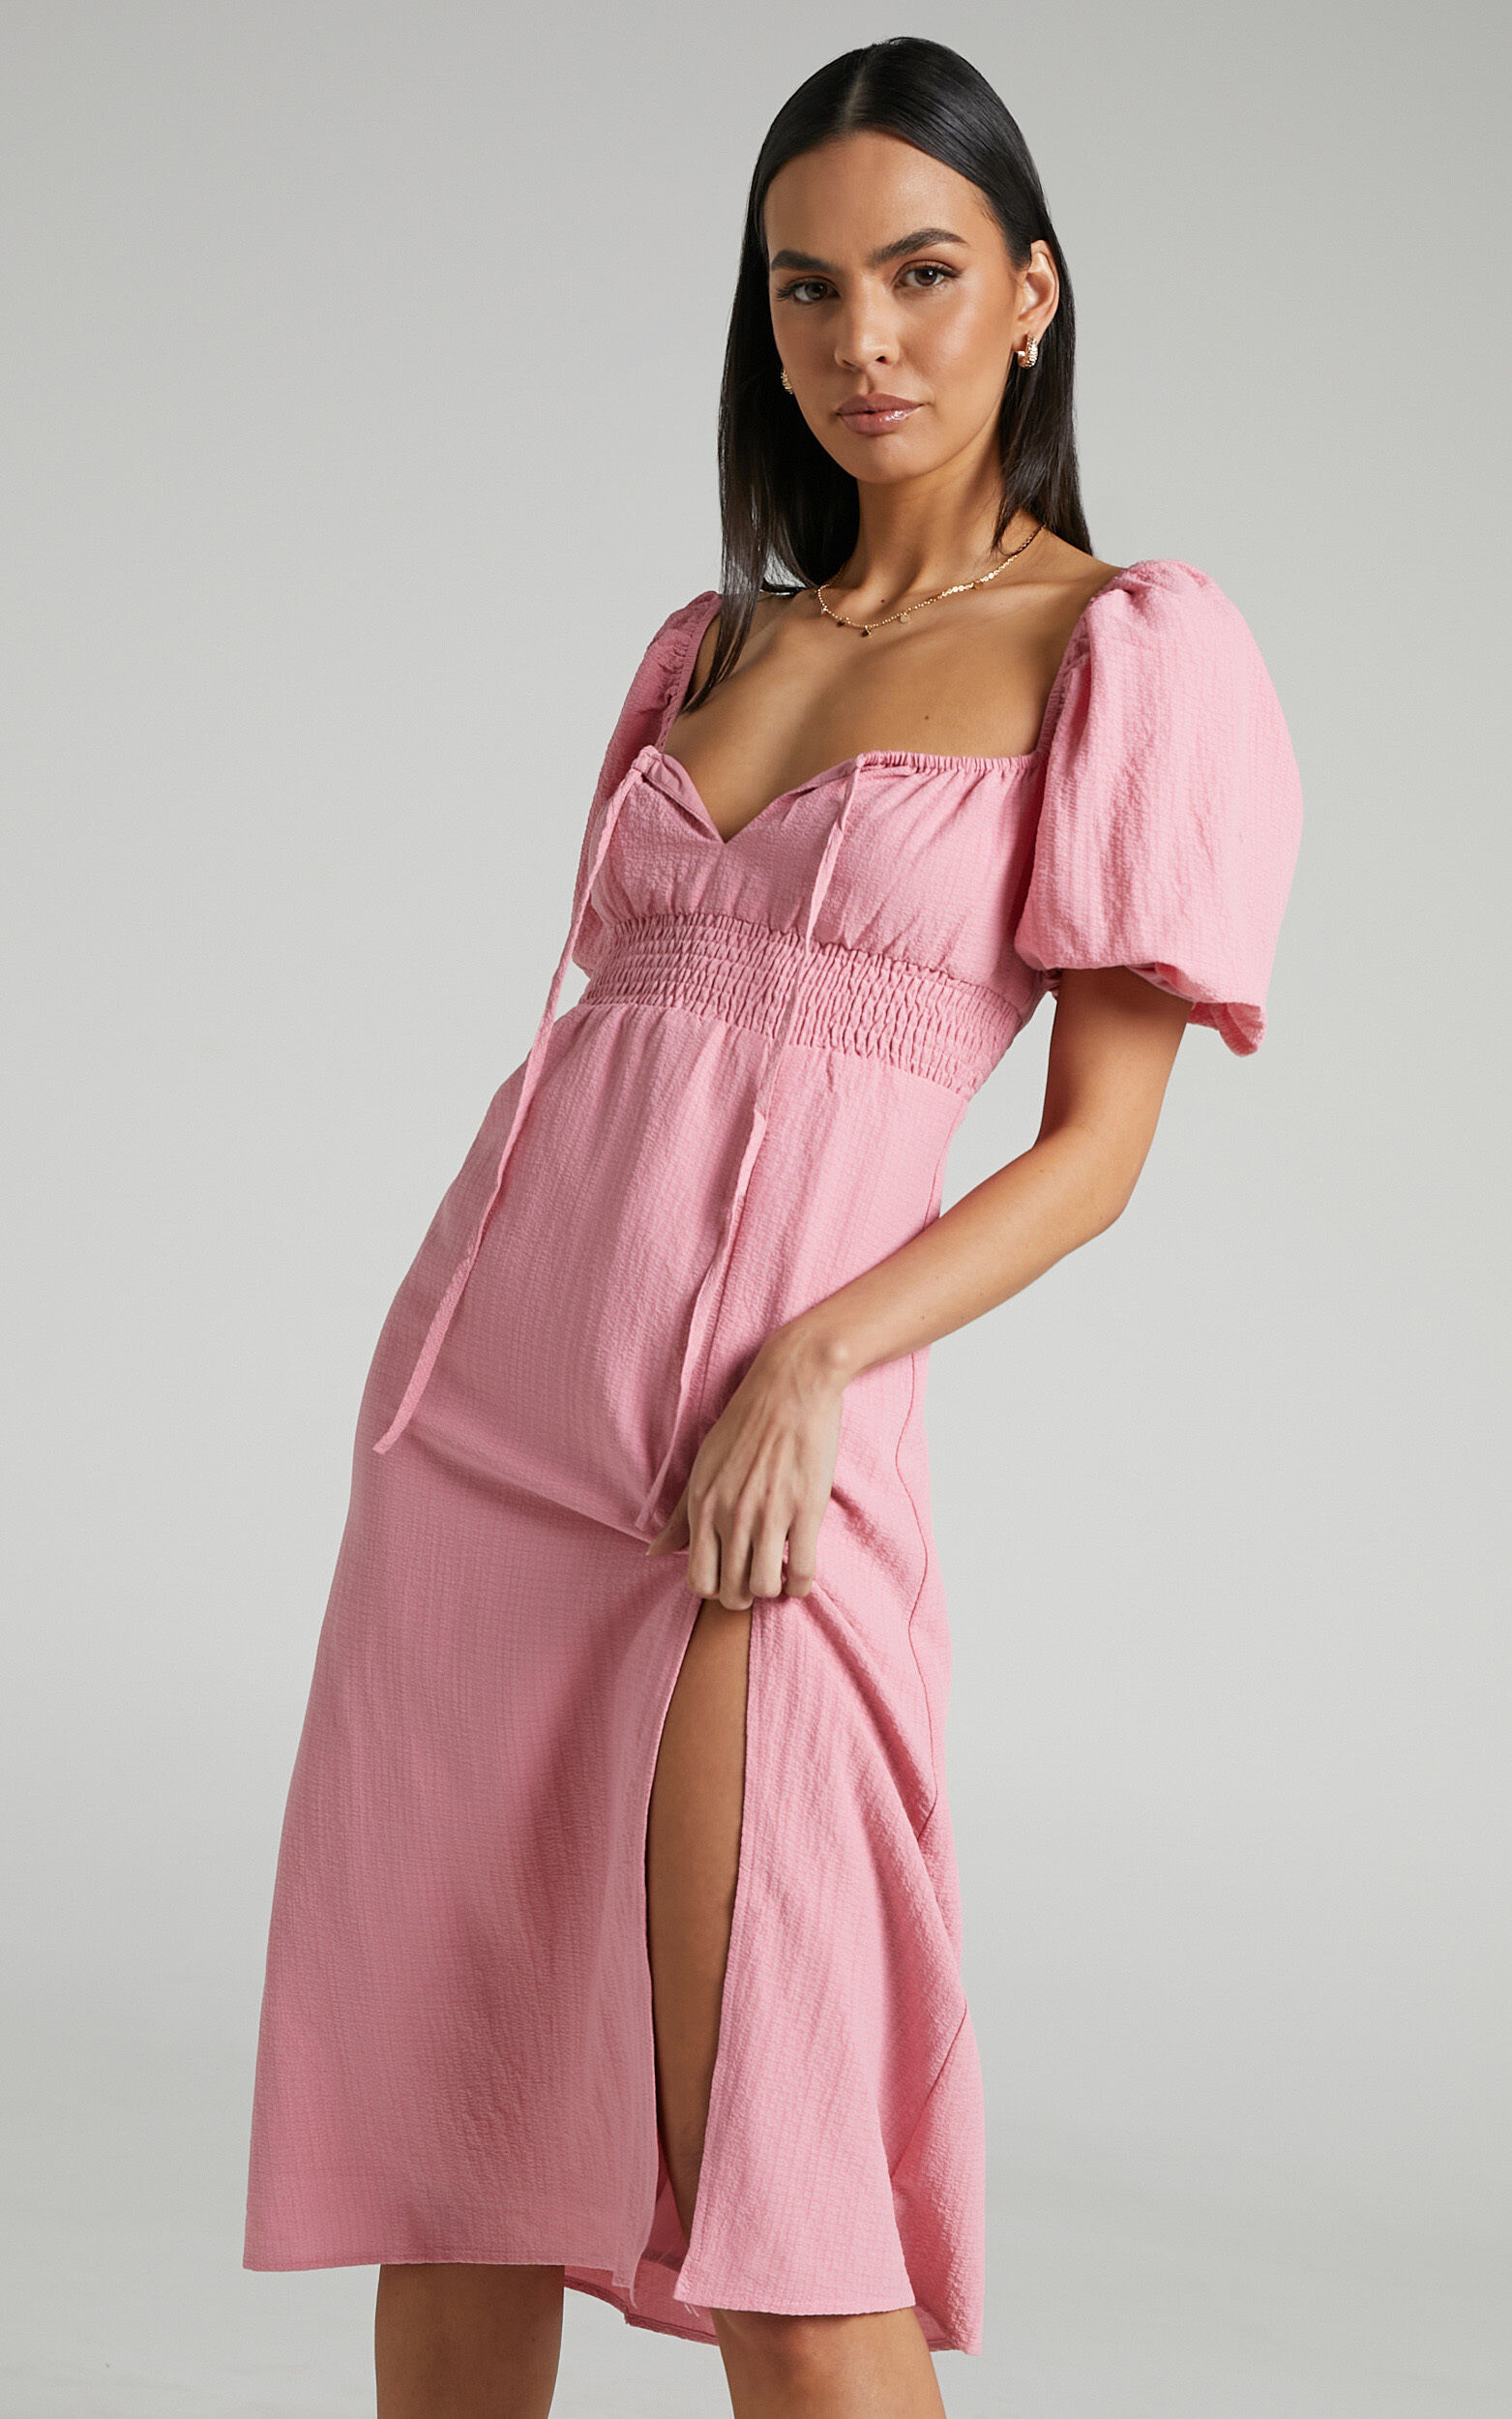 Yanet Shirred Puff Sleeve Midi Dress in Dusty Pink - 08, PNK1, super-hi-res image number null